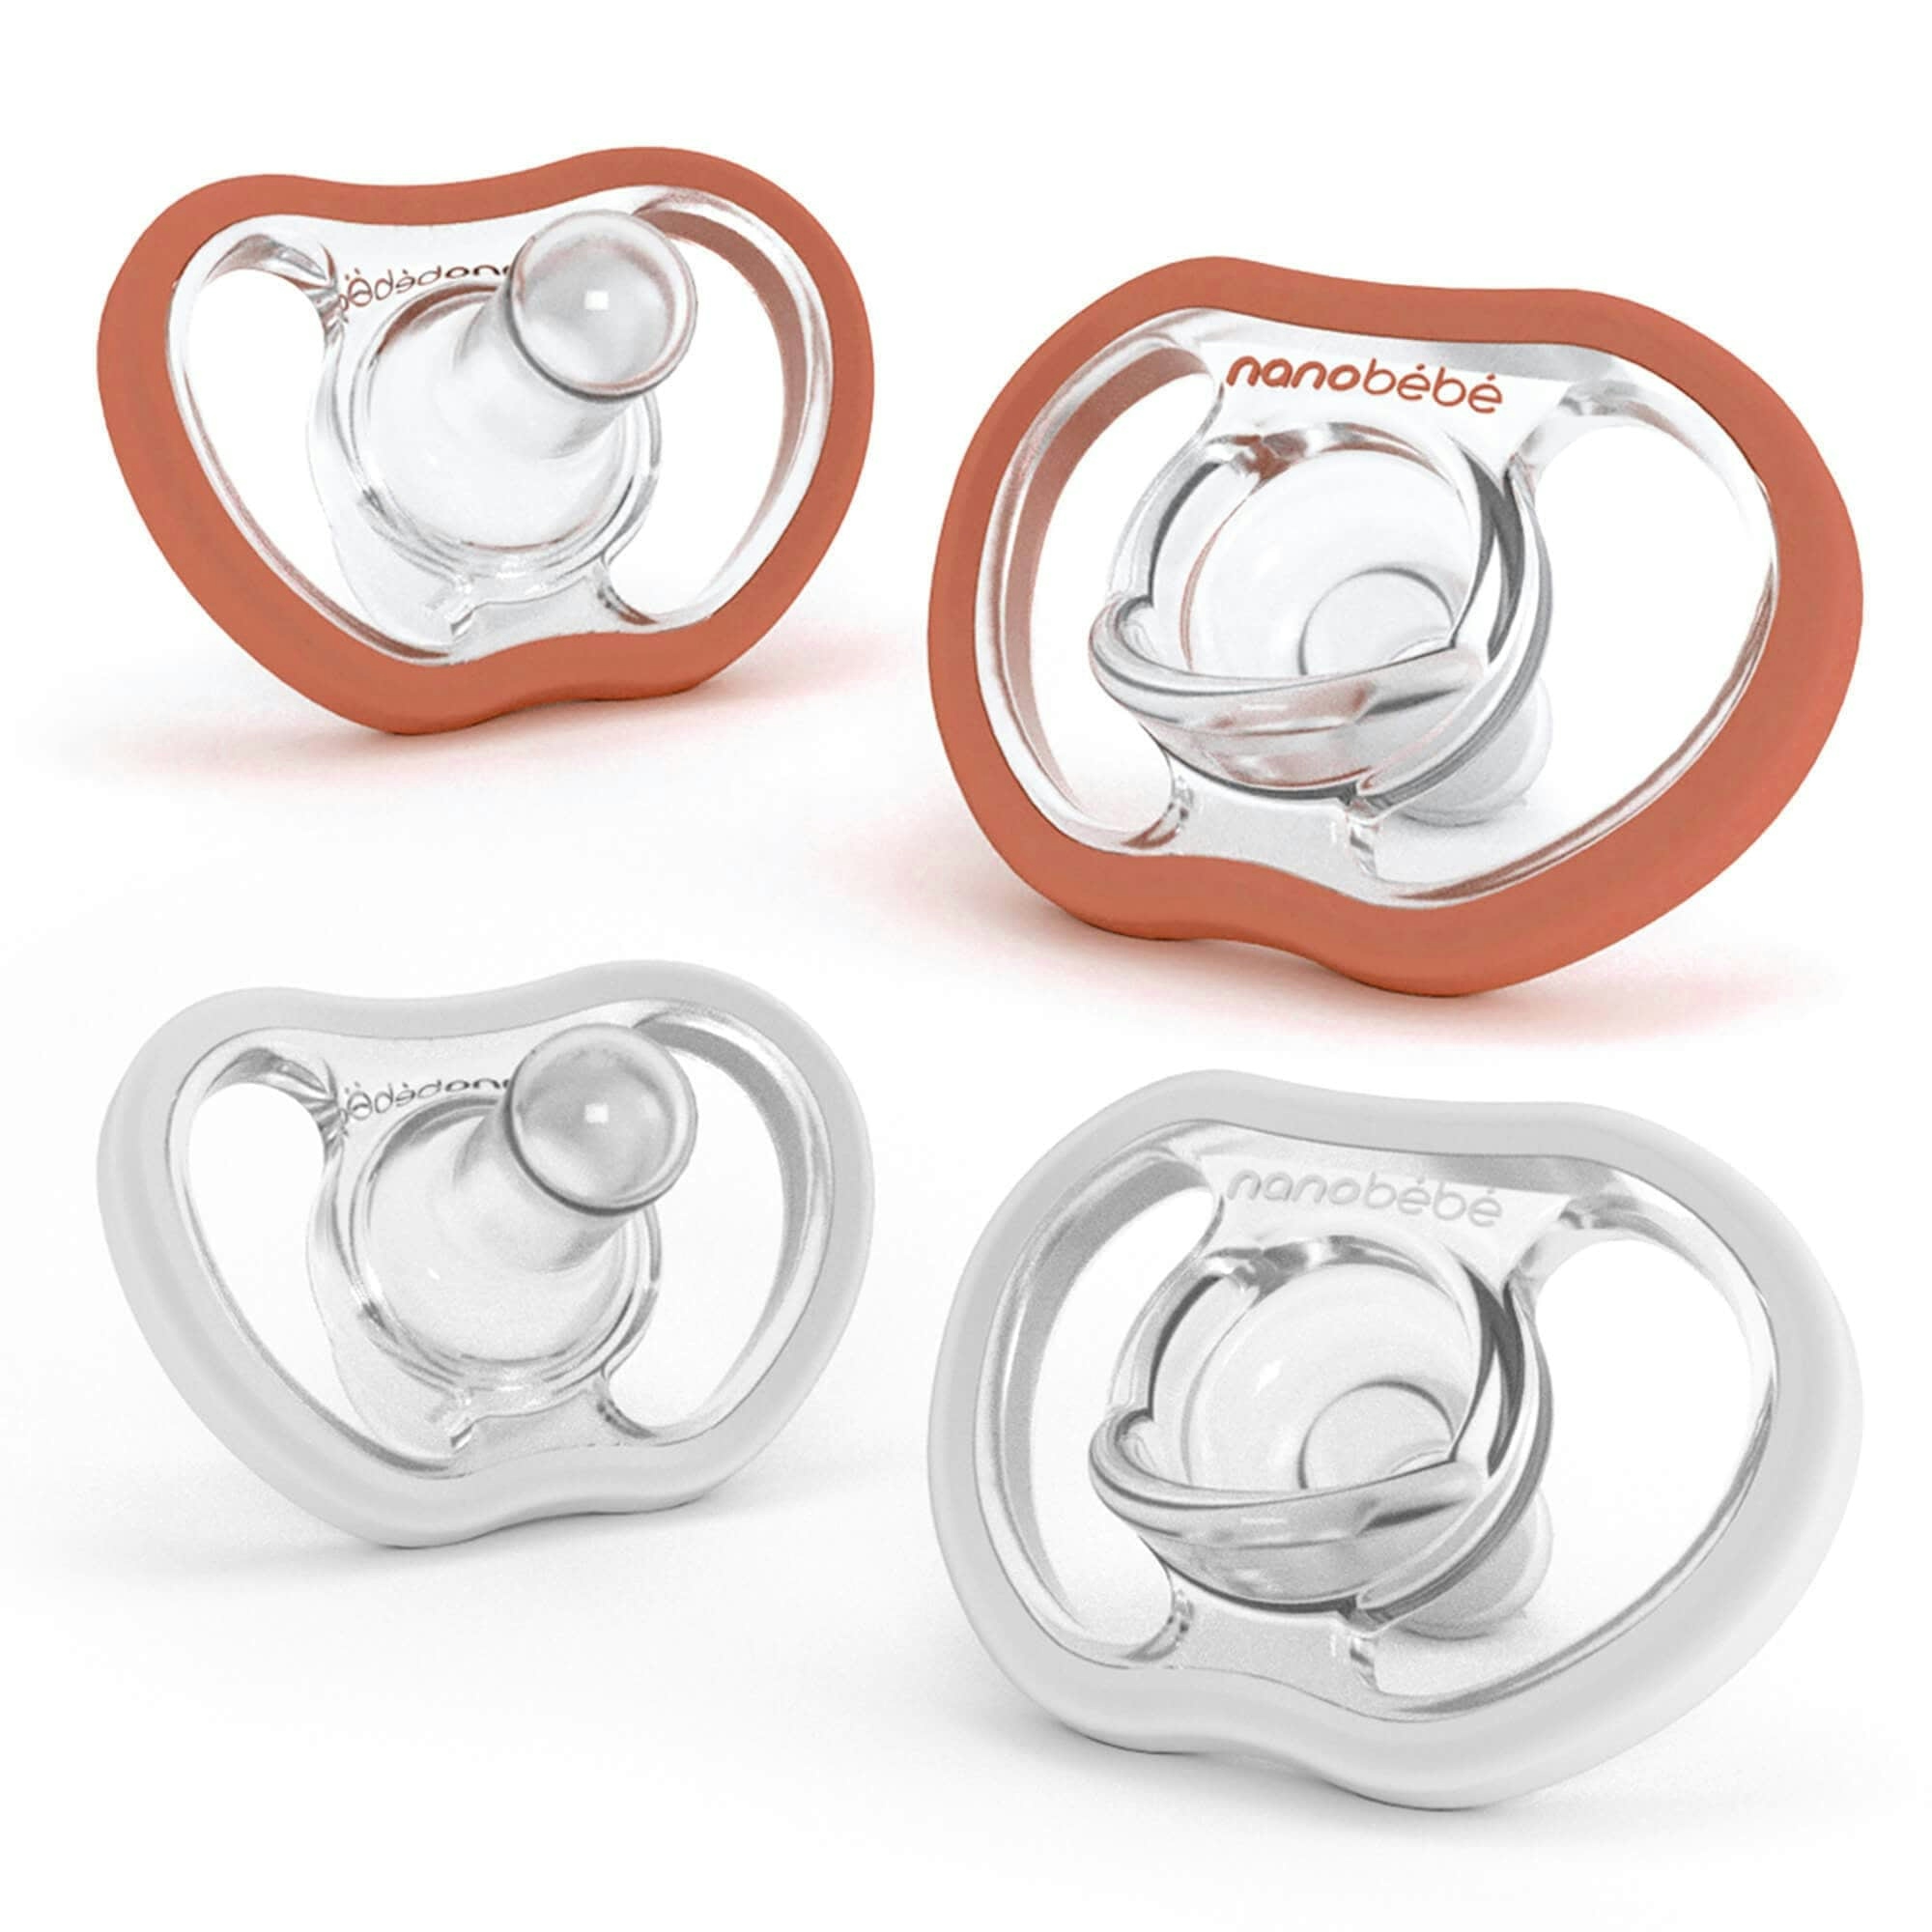 Limited-Edition Clay Pacifier